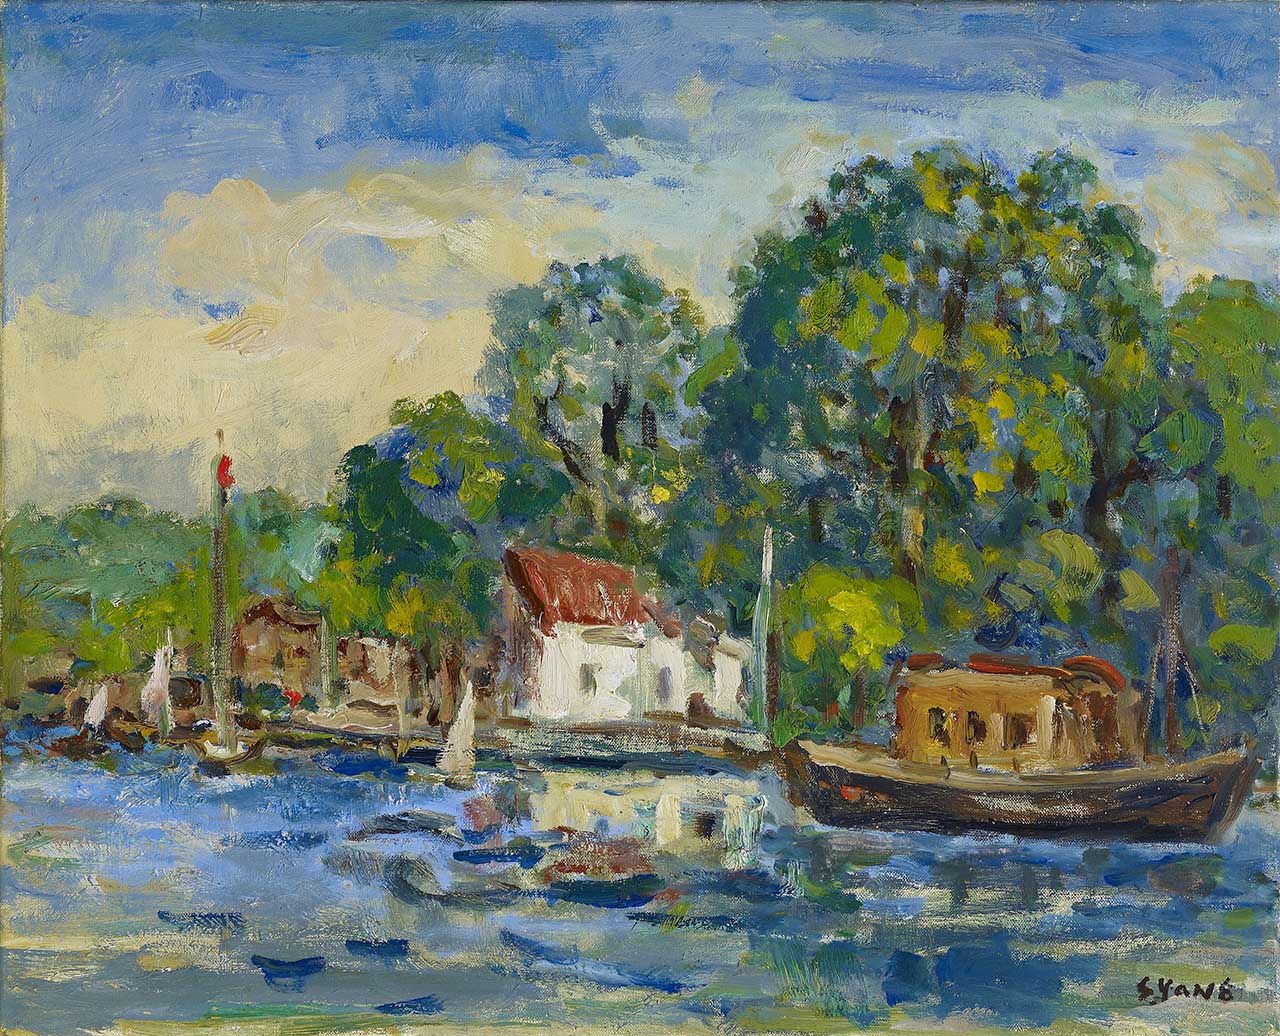 Dock (Scenery in Holland) Oil on canvas 52.3x65 cm